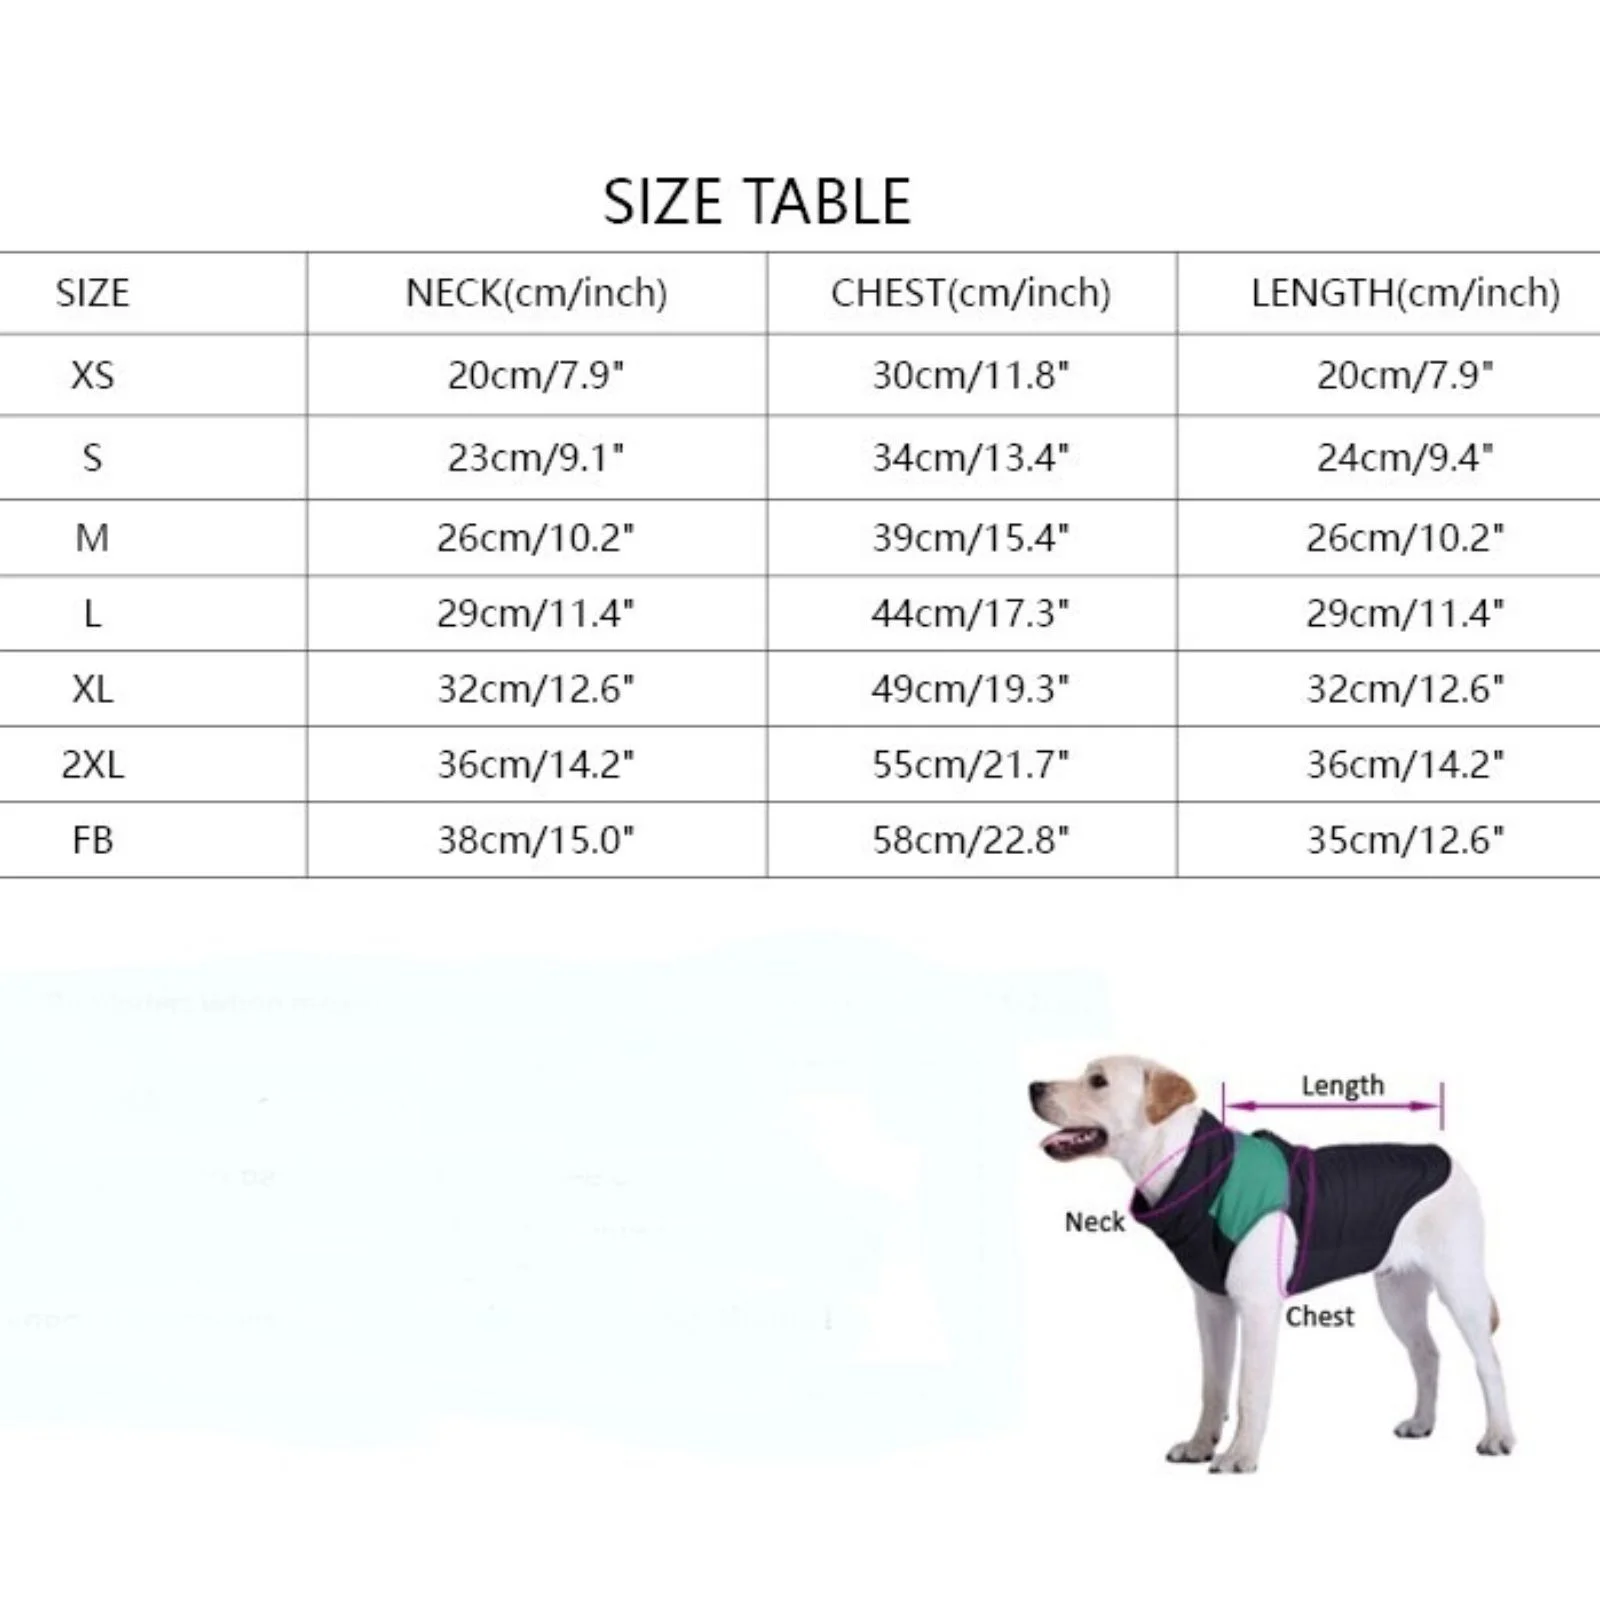 size chart for dogs